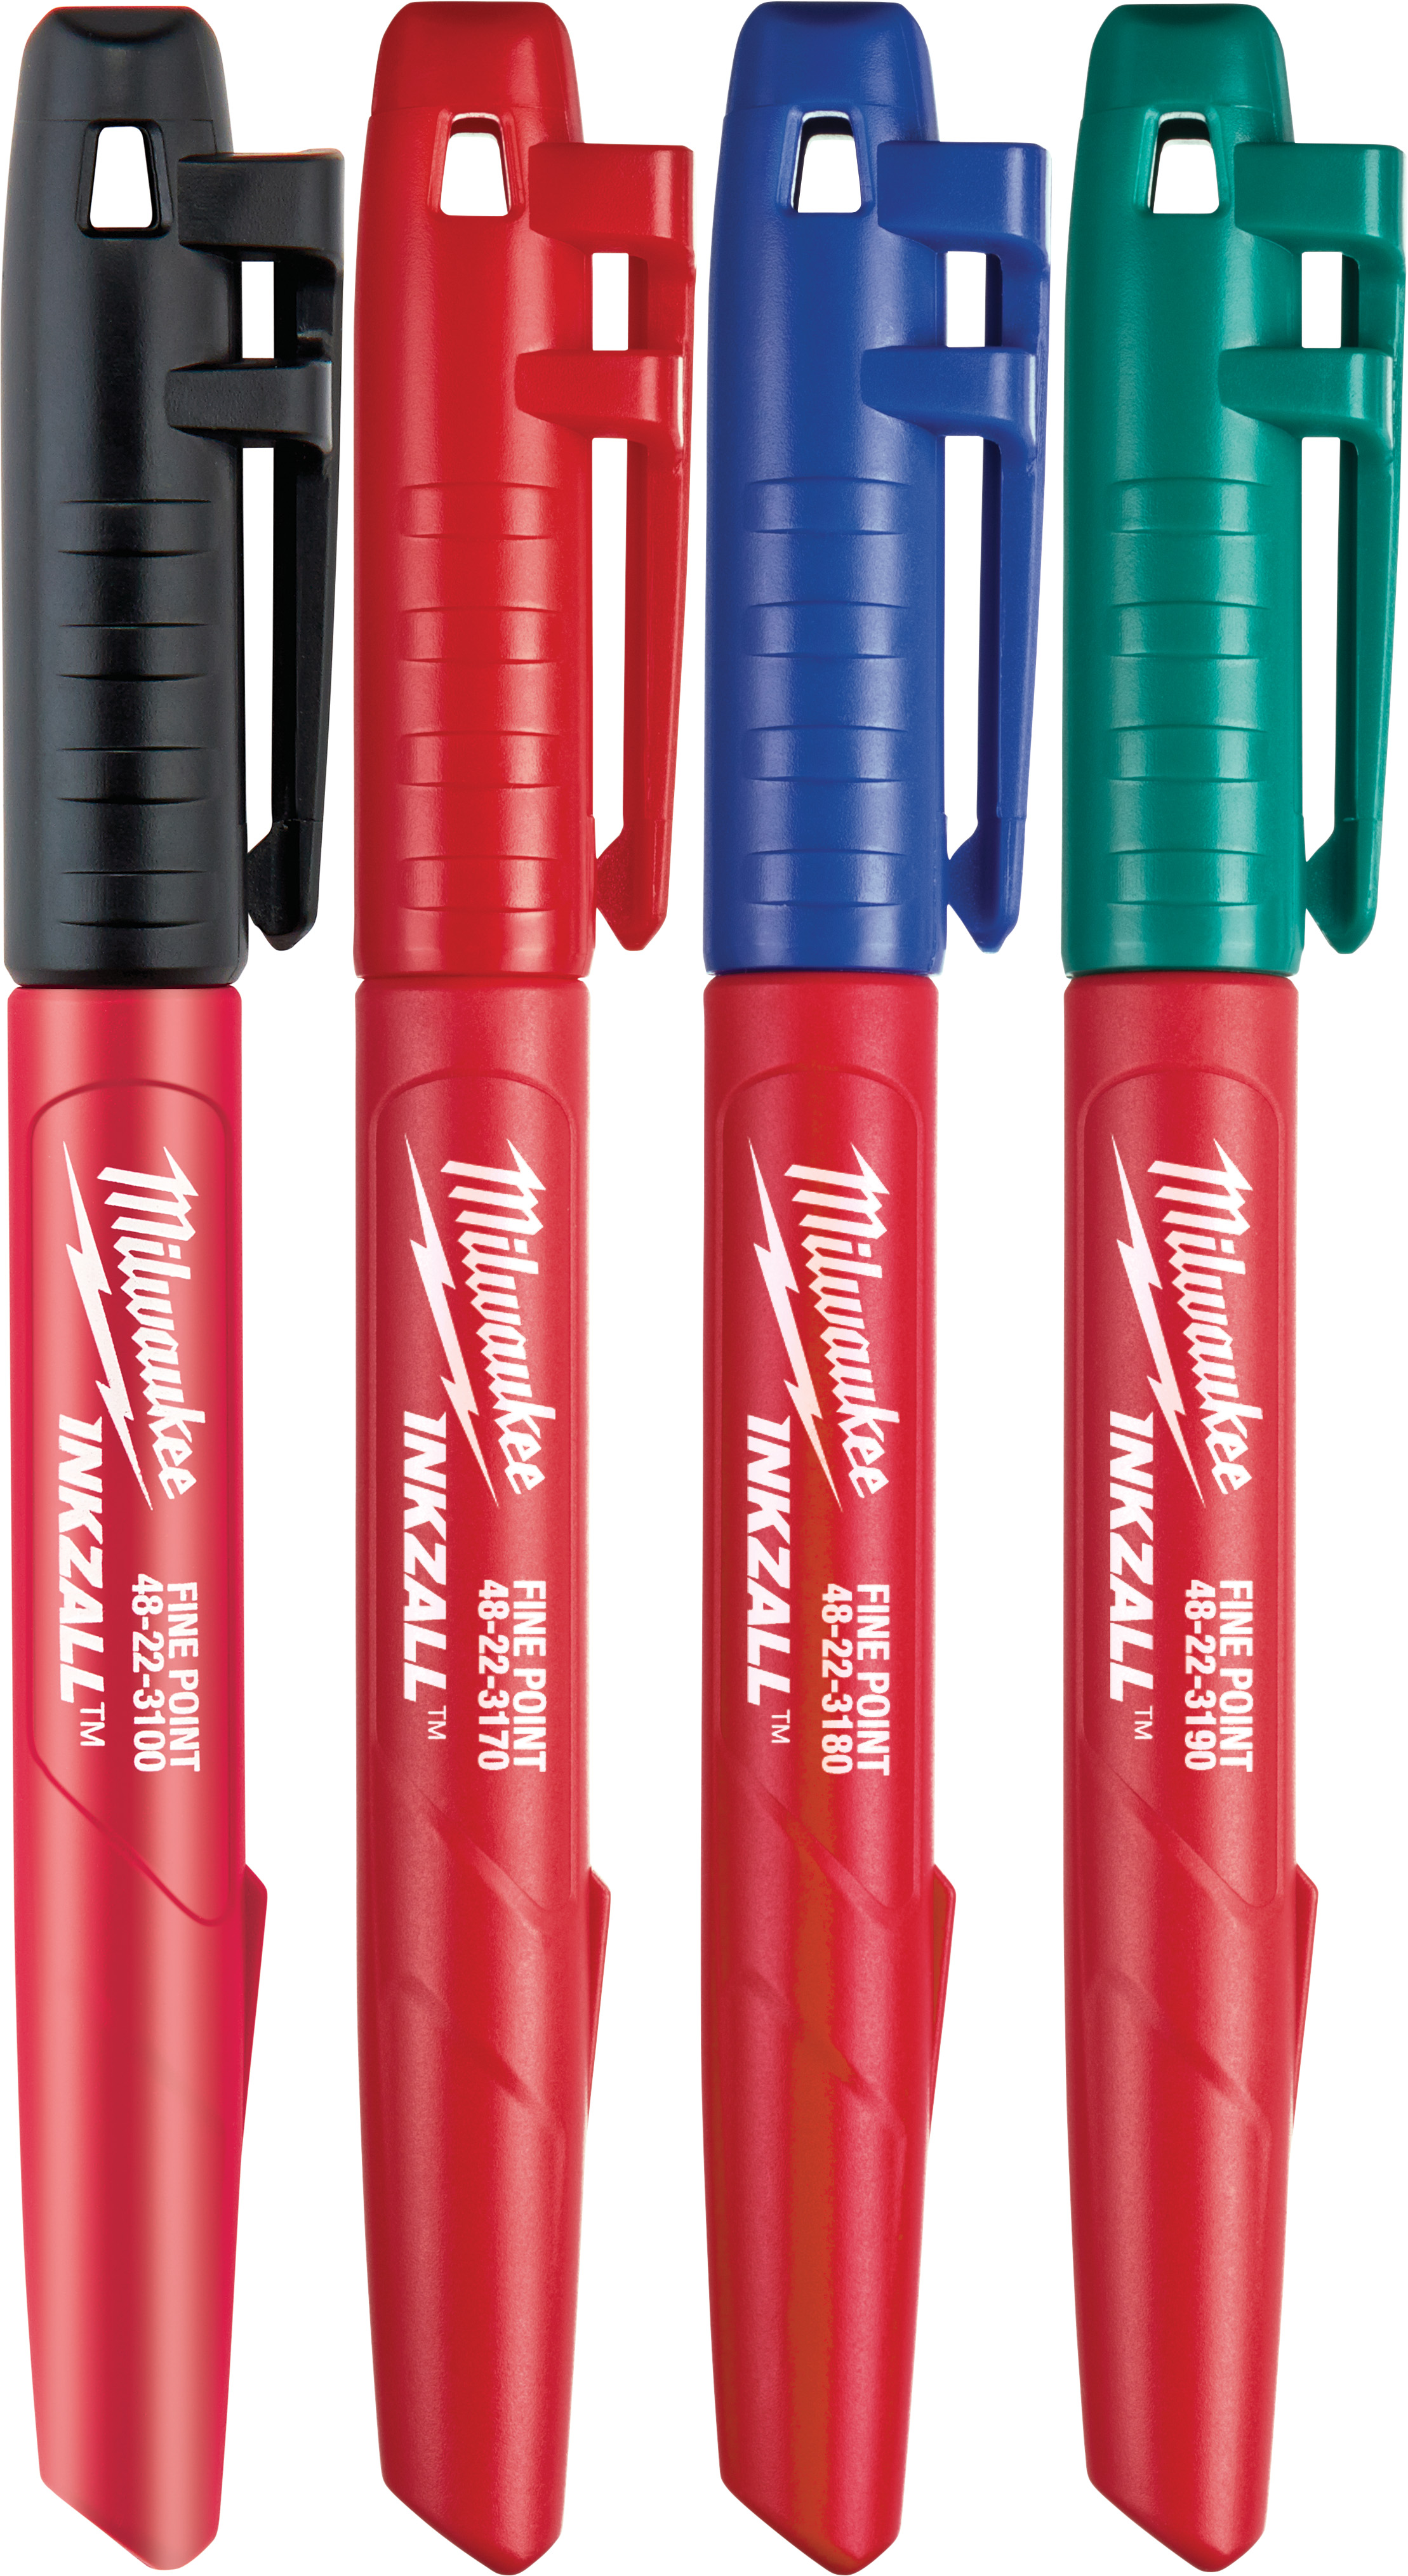 48-22-3106 045242333585 INKZALL® jobsite markers feature clog resistant tips and the ability to write through dusty, wet or oily surfaces. The durable marker tips are designed for writing on rough surfaces such as OSB, cinder block and concrete and the ink dries quickly to reduce smearing markings, without drying out quickly when the cap is left off. For added user convenience, the INKZALL® markers have a built-in hard hat clip for easy storage and access. INKZALL® markers confirm to Milwaukee's commitment to best-in-class durability and their relentless mission to provide innovative solutions to the end user.